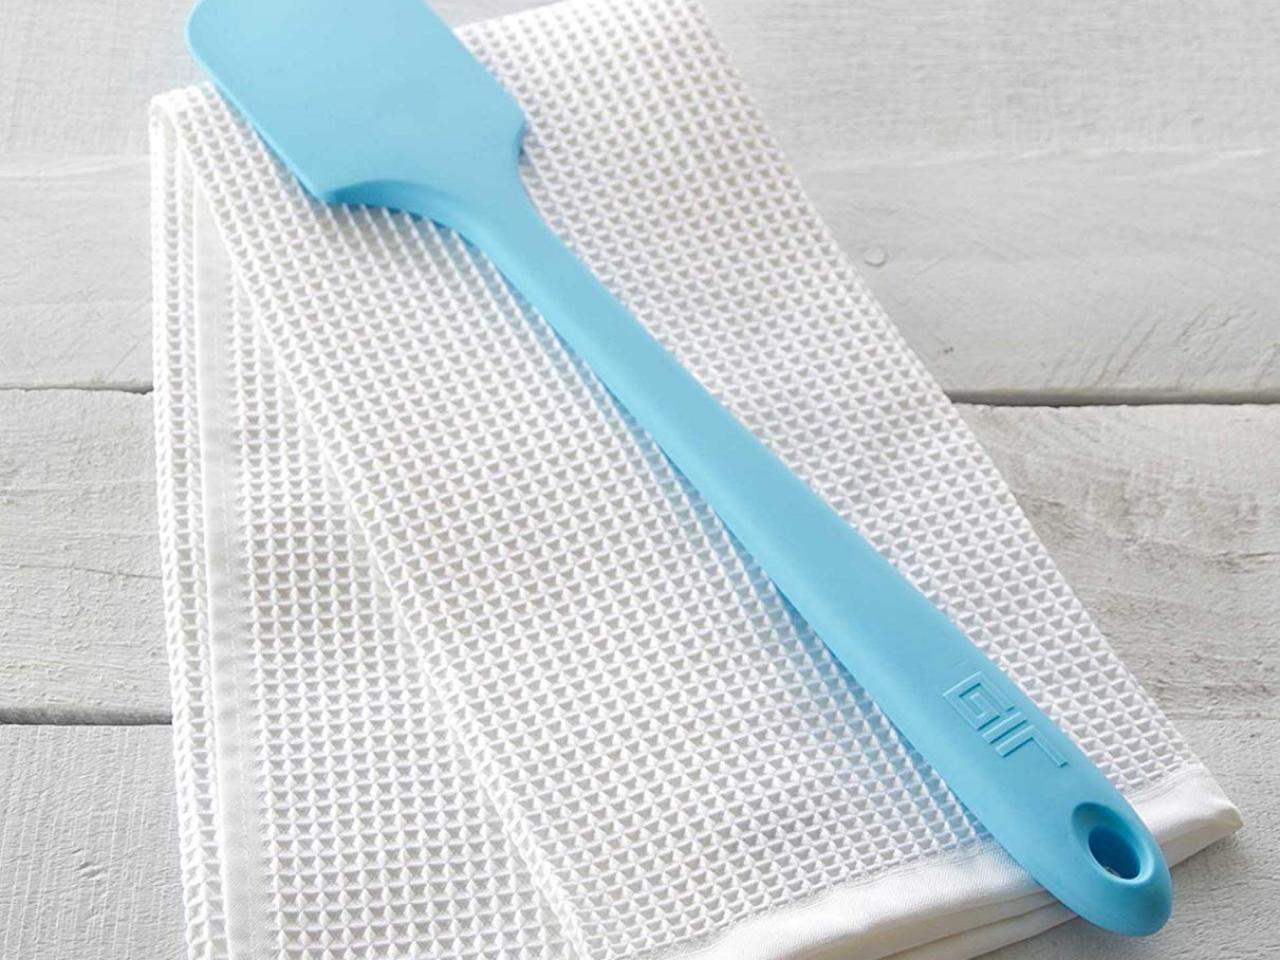 https://food.fnr.sndimg.com/content/dam/images/food/products/2018/12/20/rx_gir-get-it-right-silicone-spatula.jpeg.rend.hgtvcom.1280.960.suffix/1545349006189.jpeg